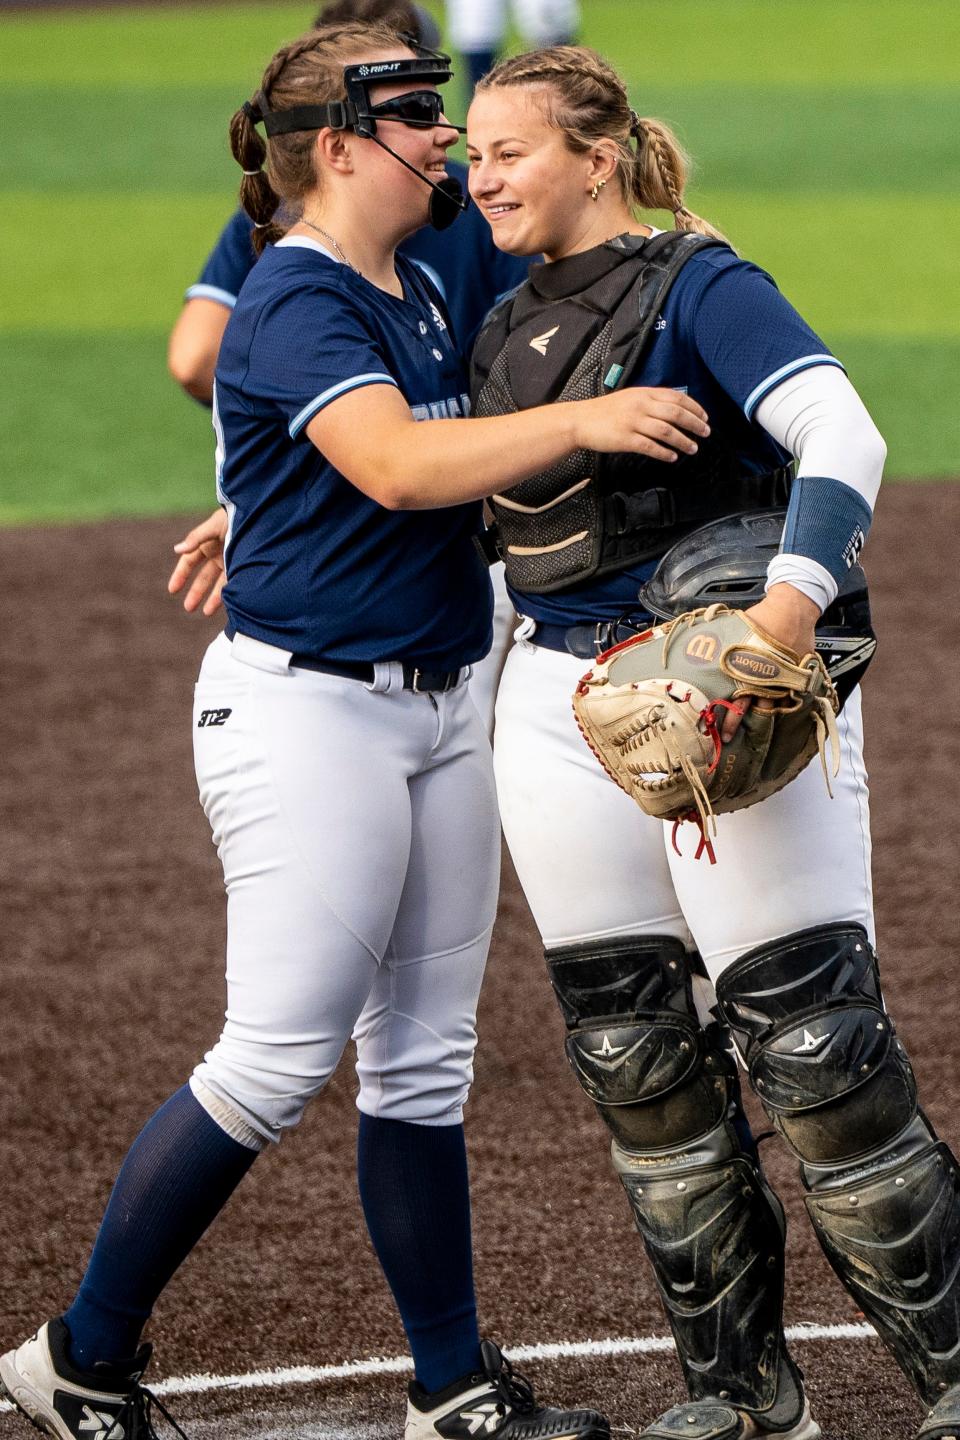 Morris Catholic takes on St. Joseph Academy in the Non-Public B softball state finals at Kean University in Union, NJ on Friday, June 9, 2023. MC #23 Carly Mockenhaupt and MC #24 Kate Heslin. 